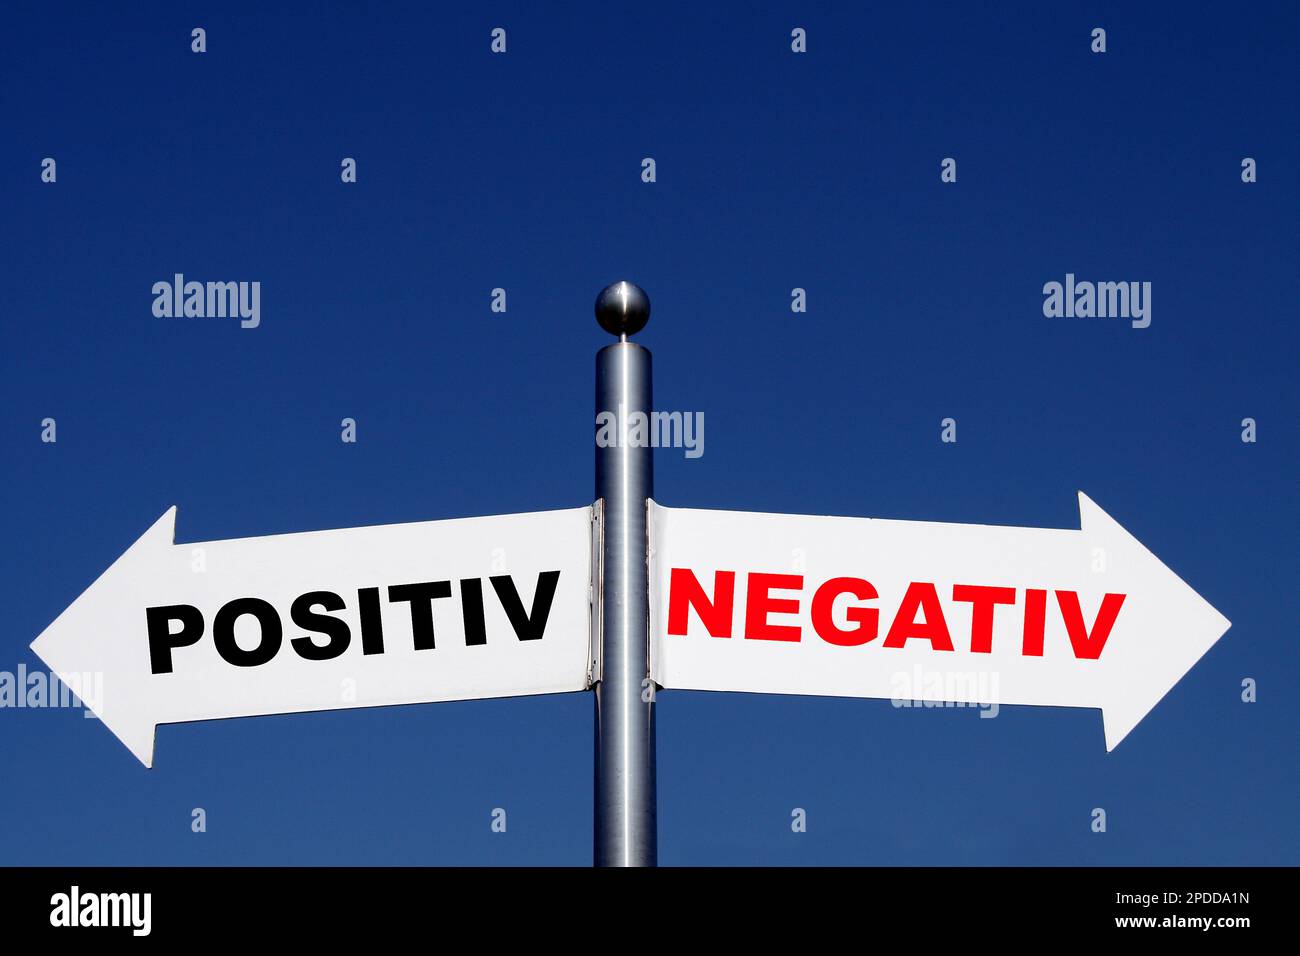 signposts pointing in different directions, options positiv - negativ Stock Photo